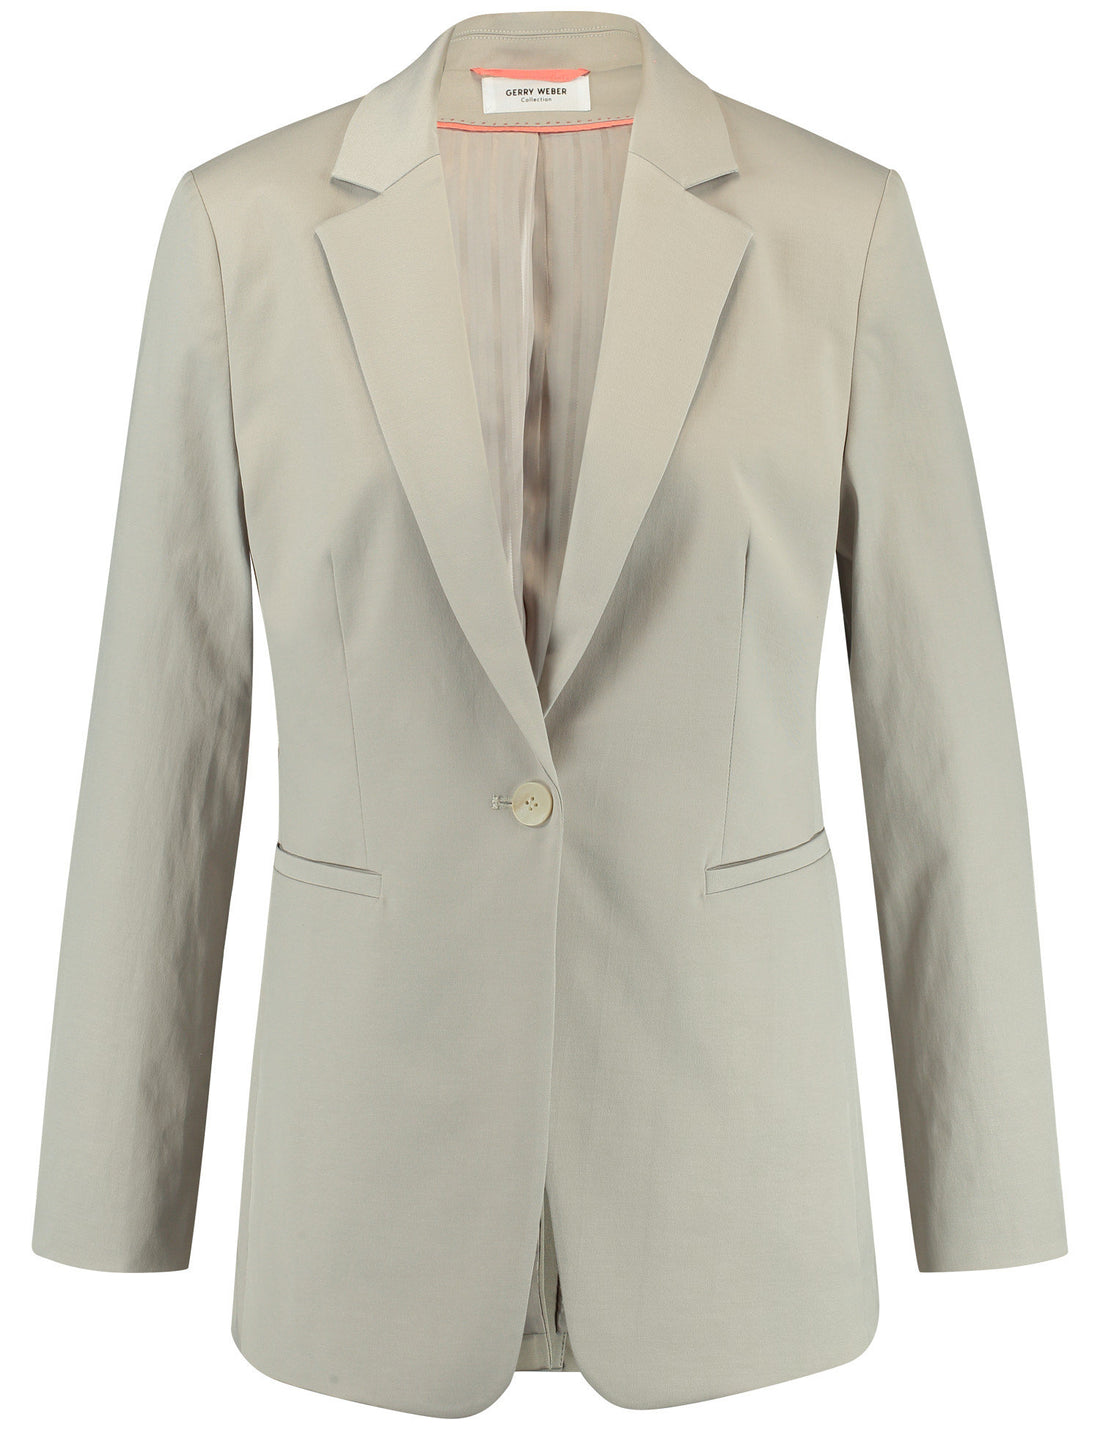 Figure-Skimming Classic Blazer With Stretch For Comfort_330004-31332_90031_01